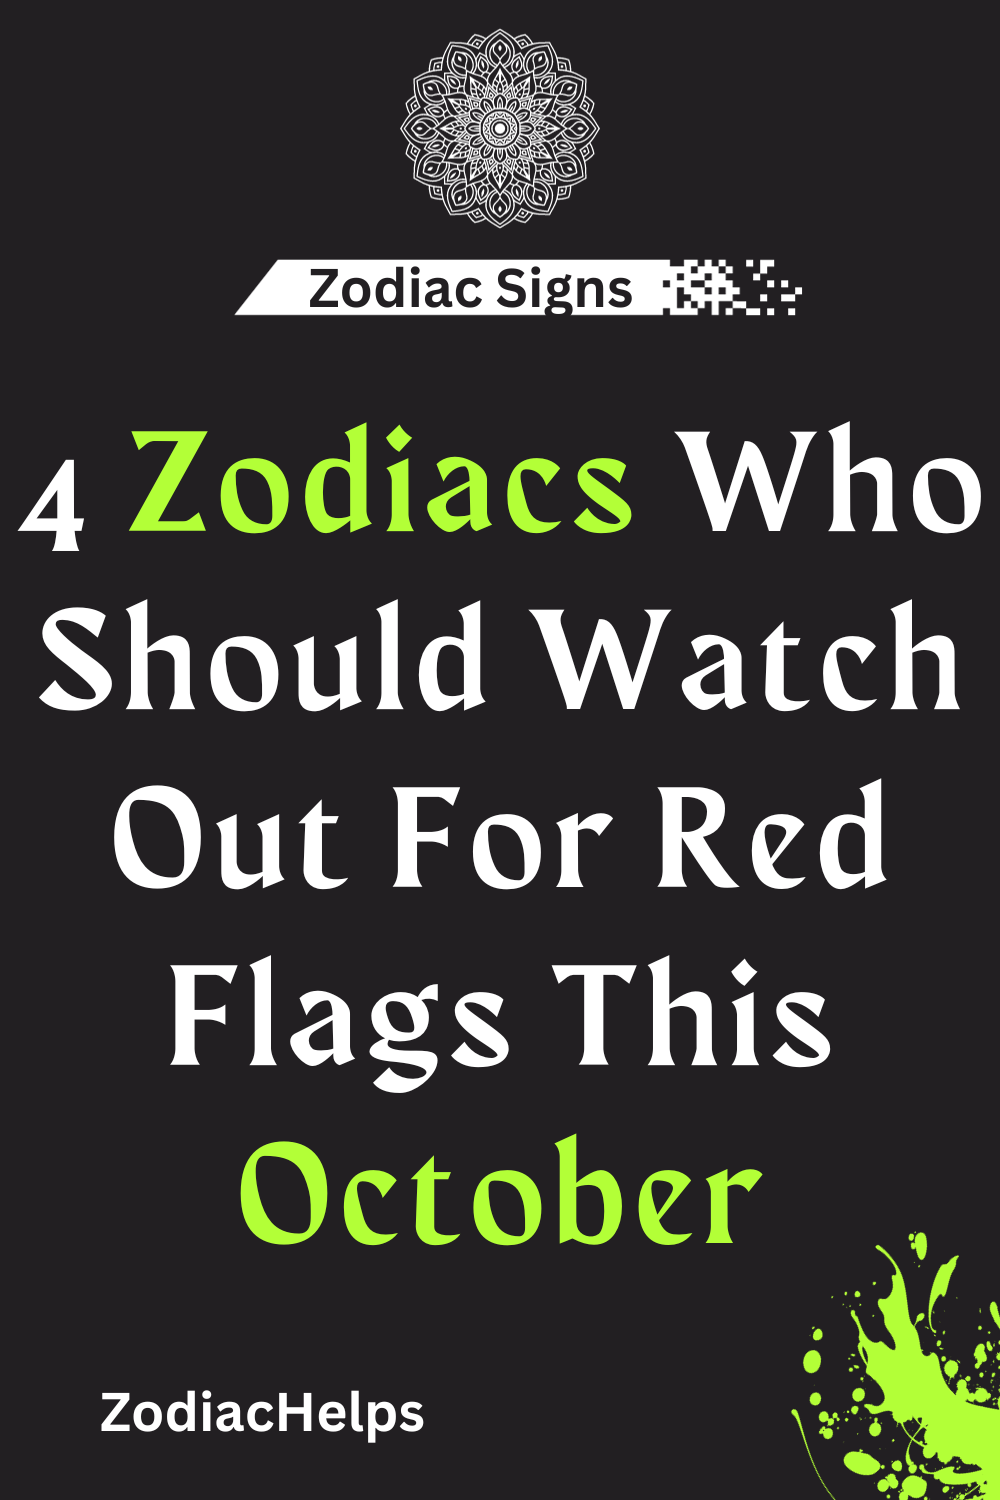 4 Zodiacs Who Should Watch Out For Red Flags This October